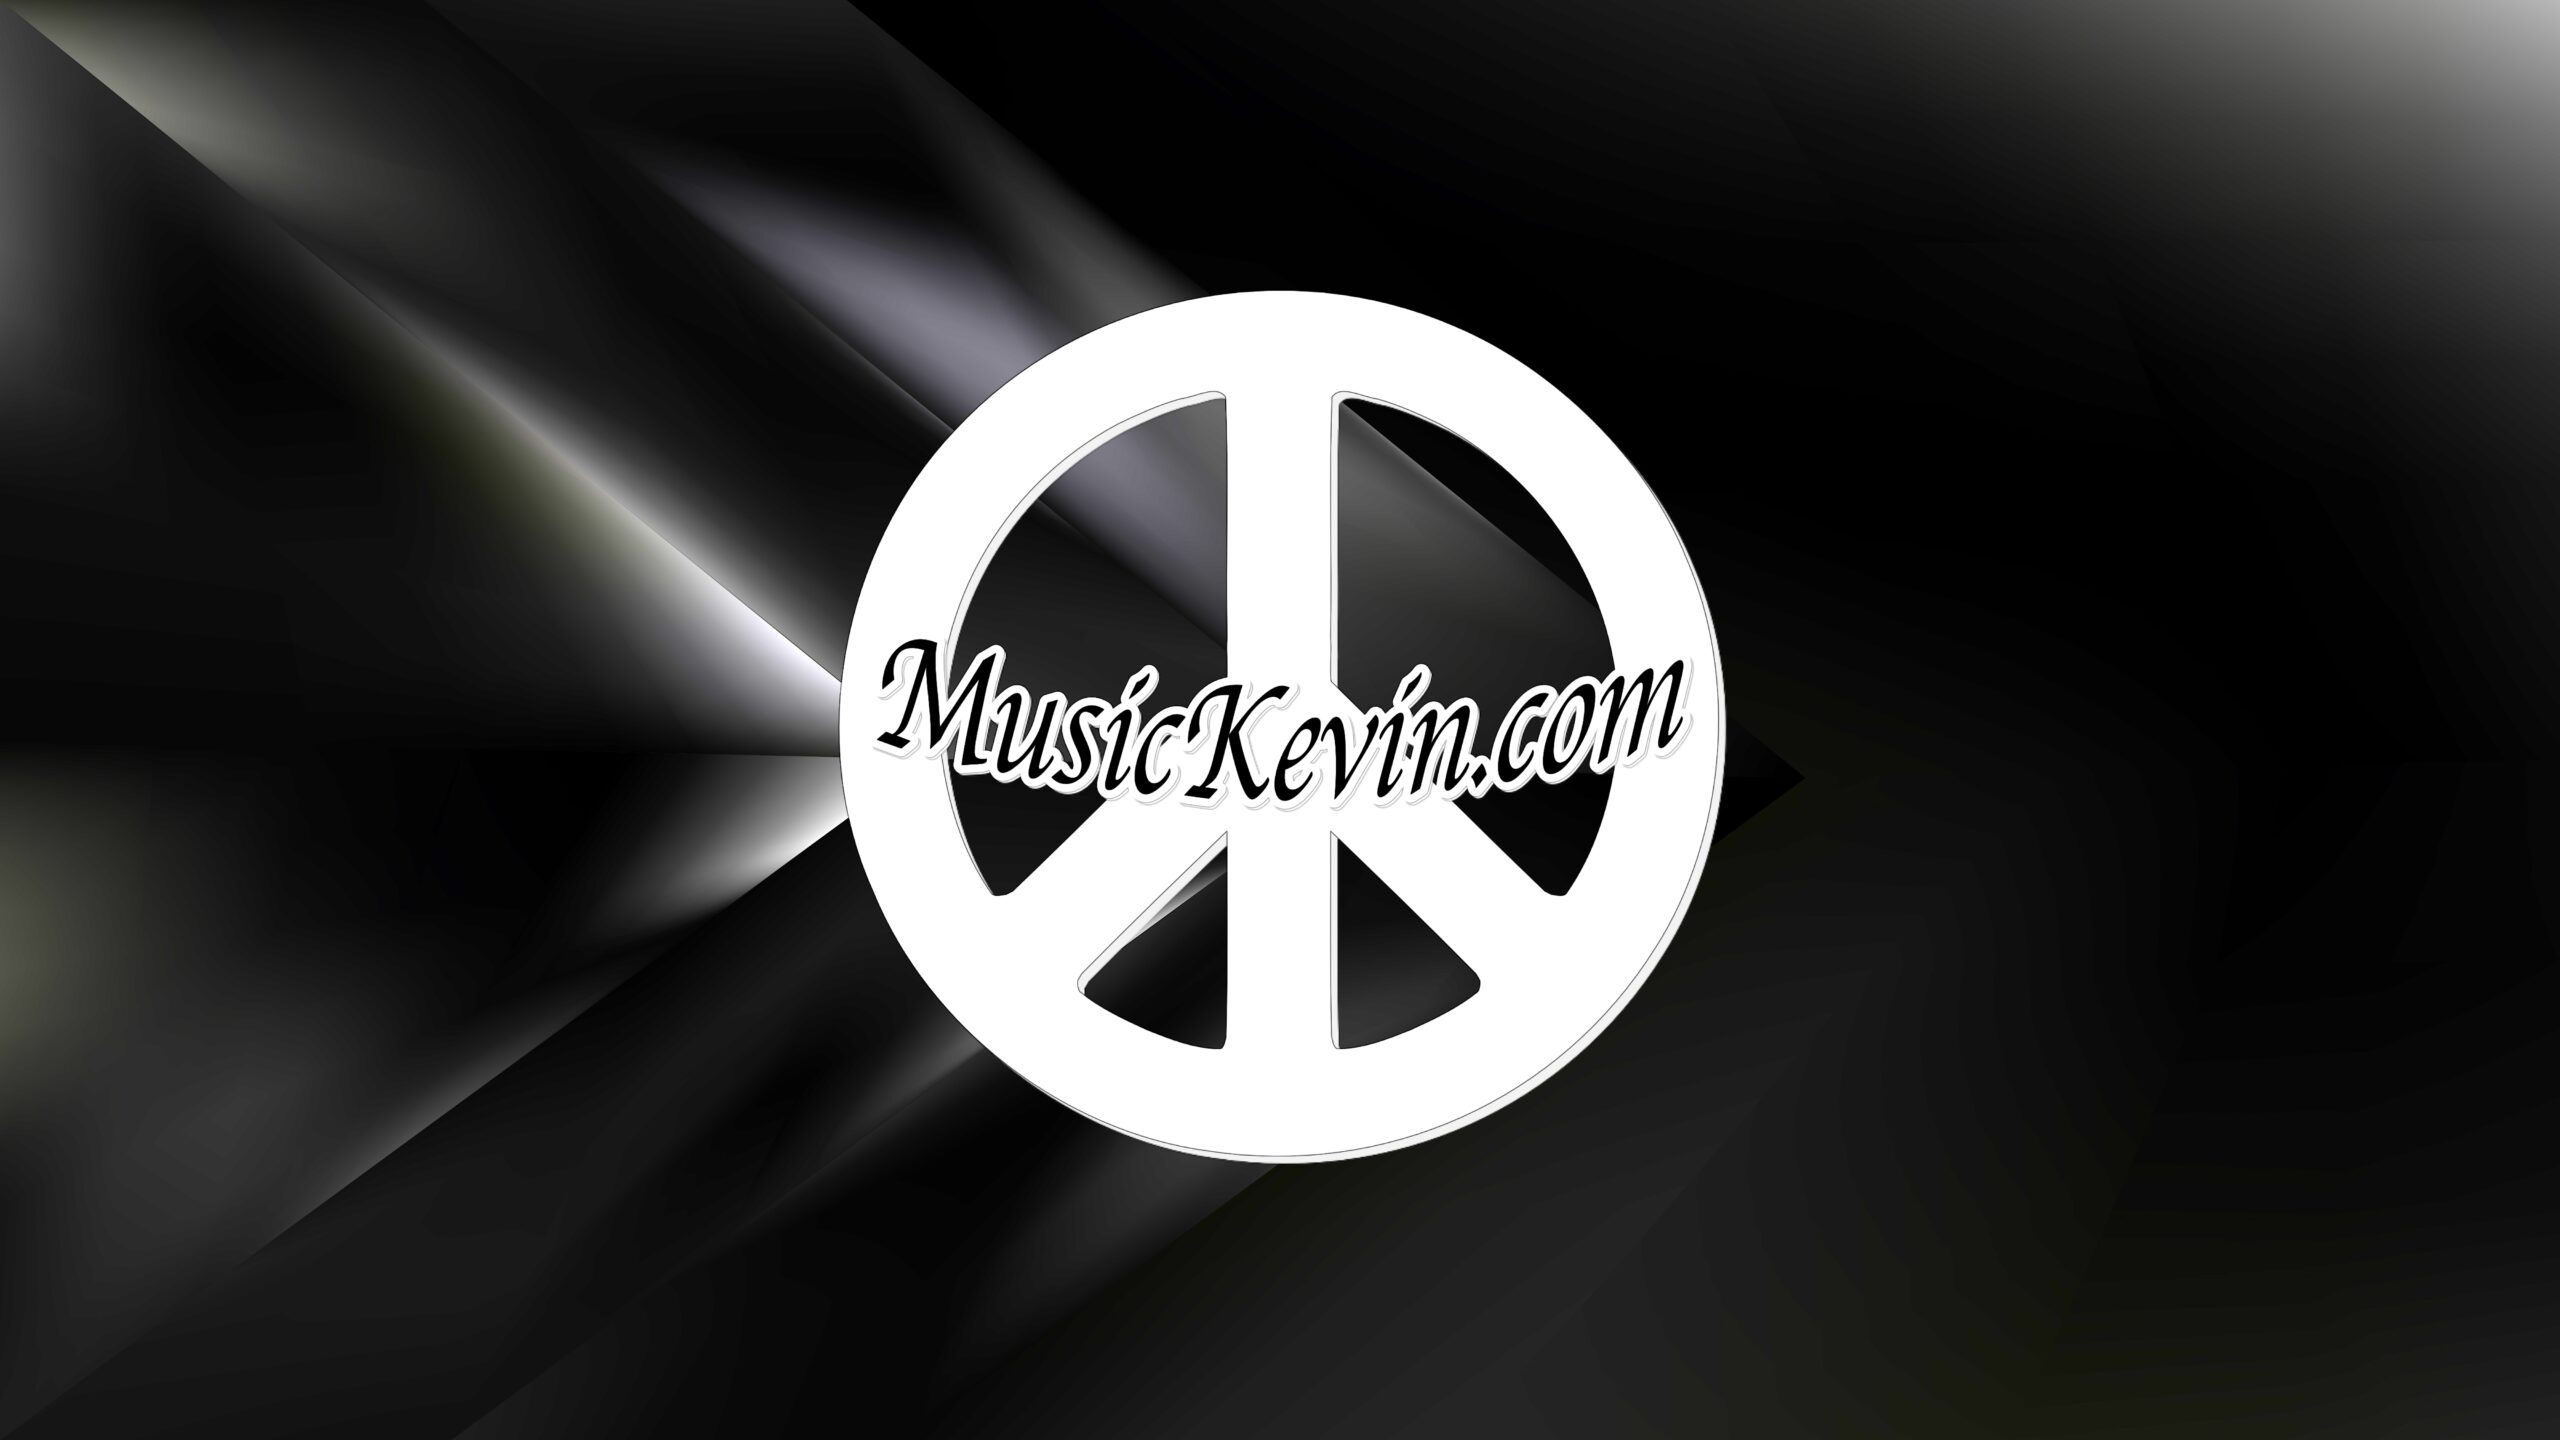 MusicKevin banner - Black background with peace symbol on it